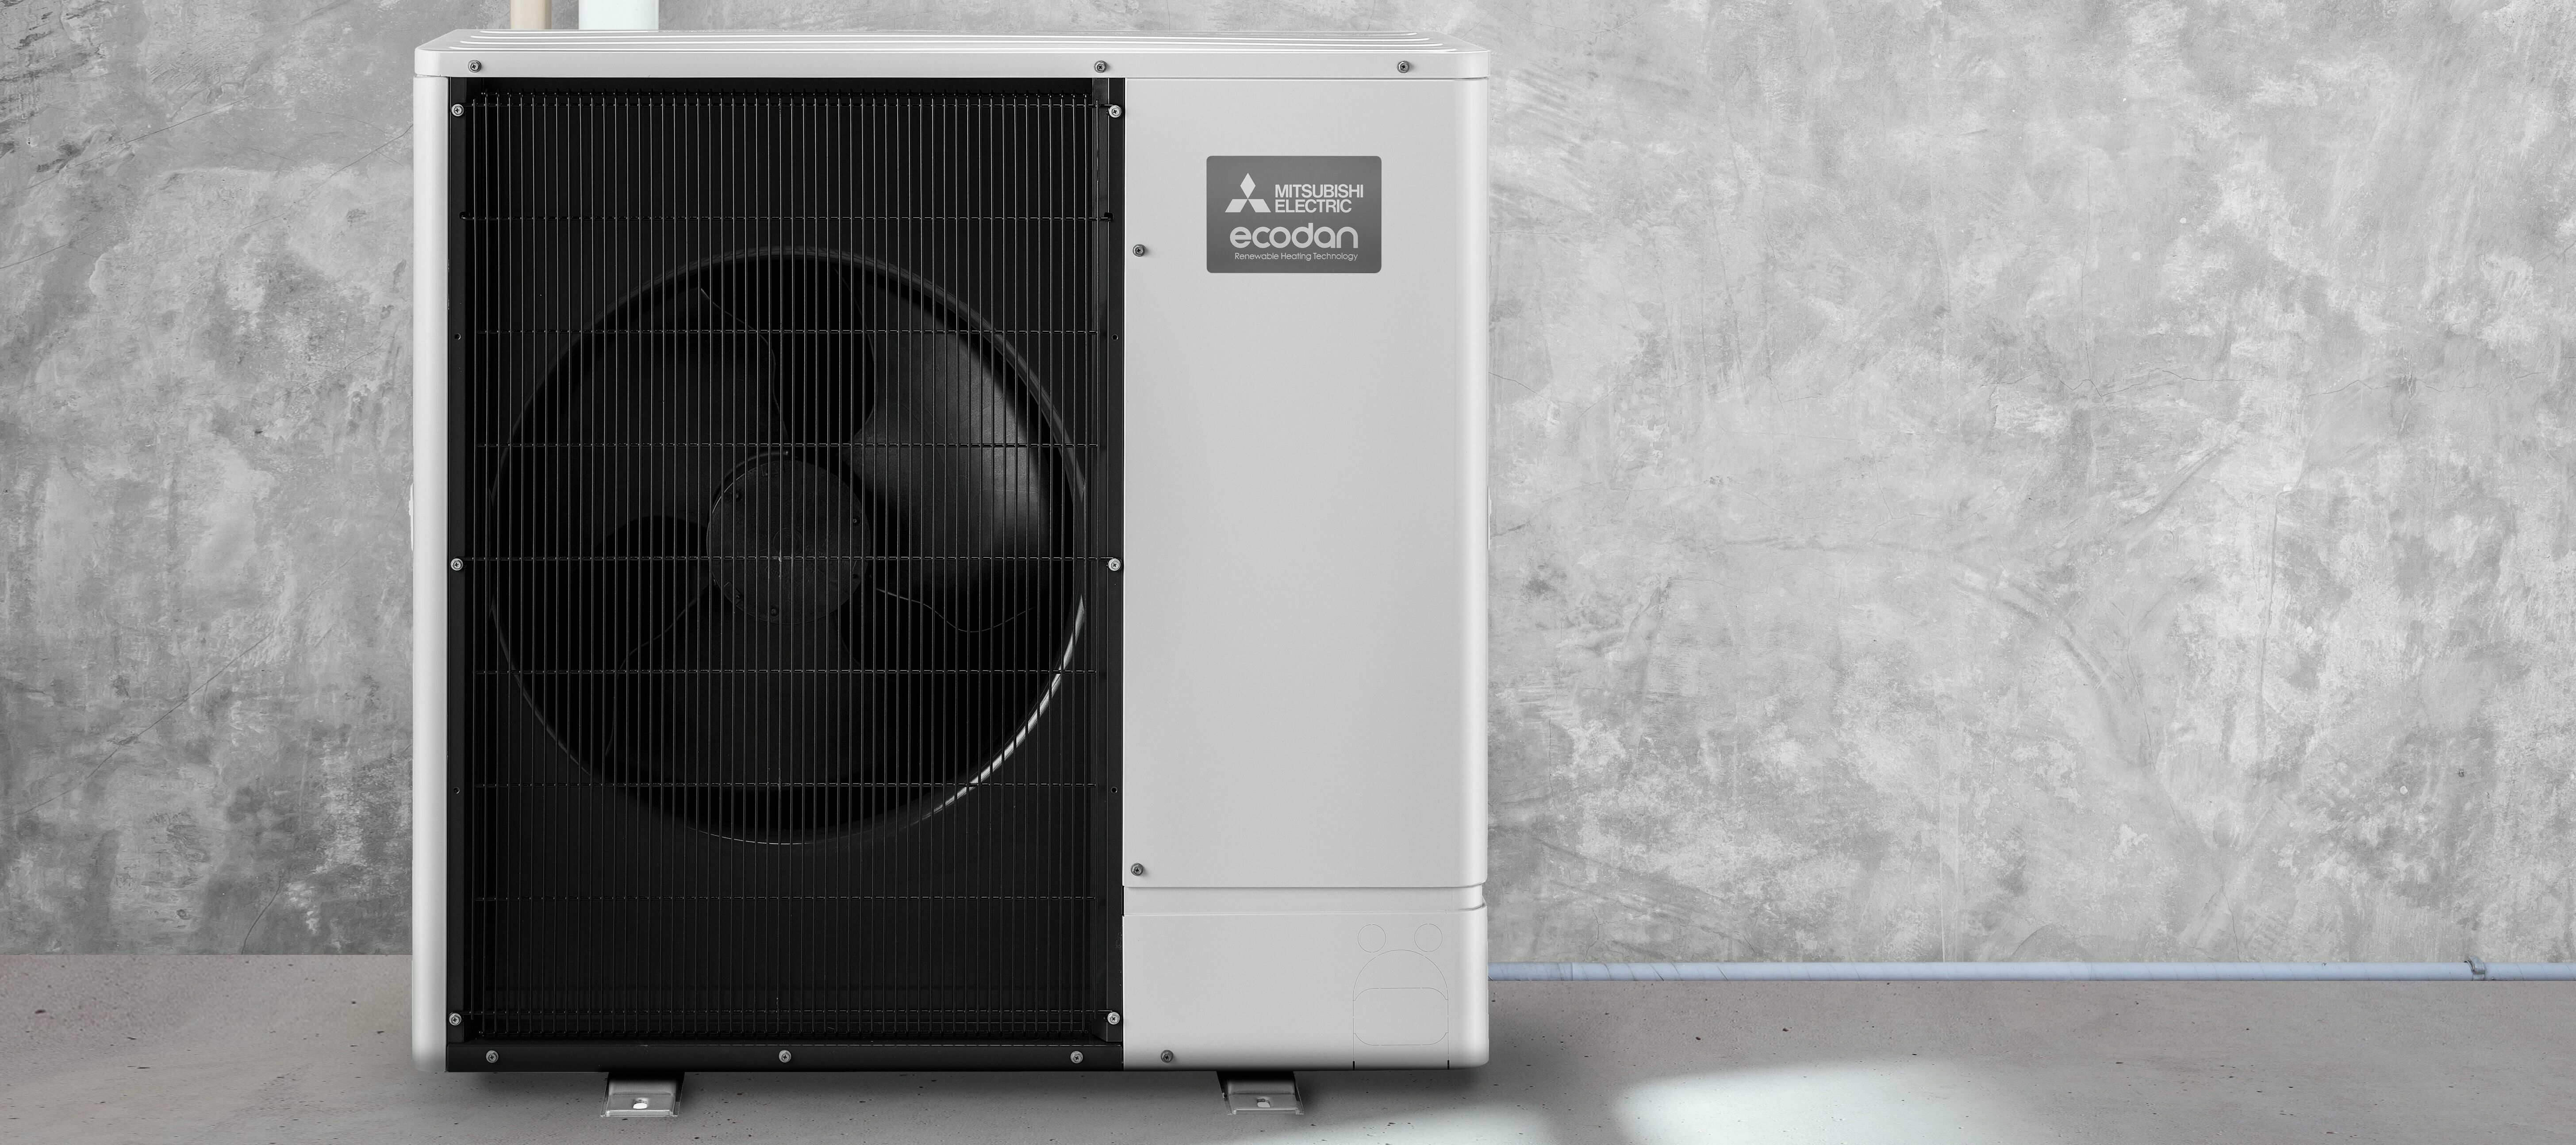 Air Source Heat Pump (ASHP) cost analysis - how does it compare to a gas boiler?